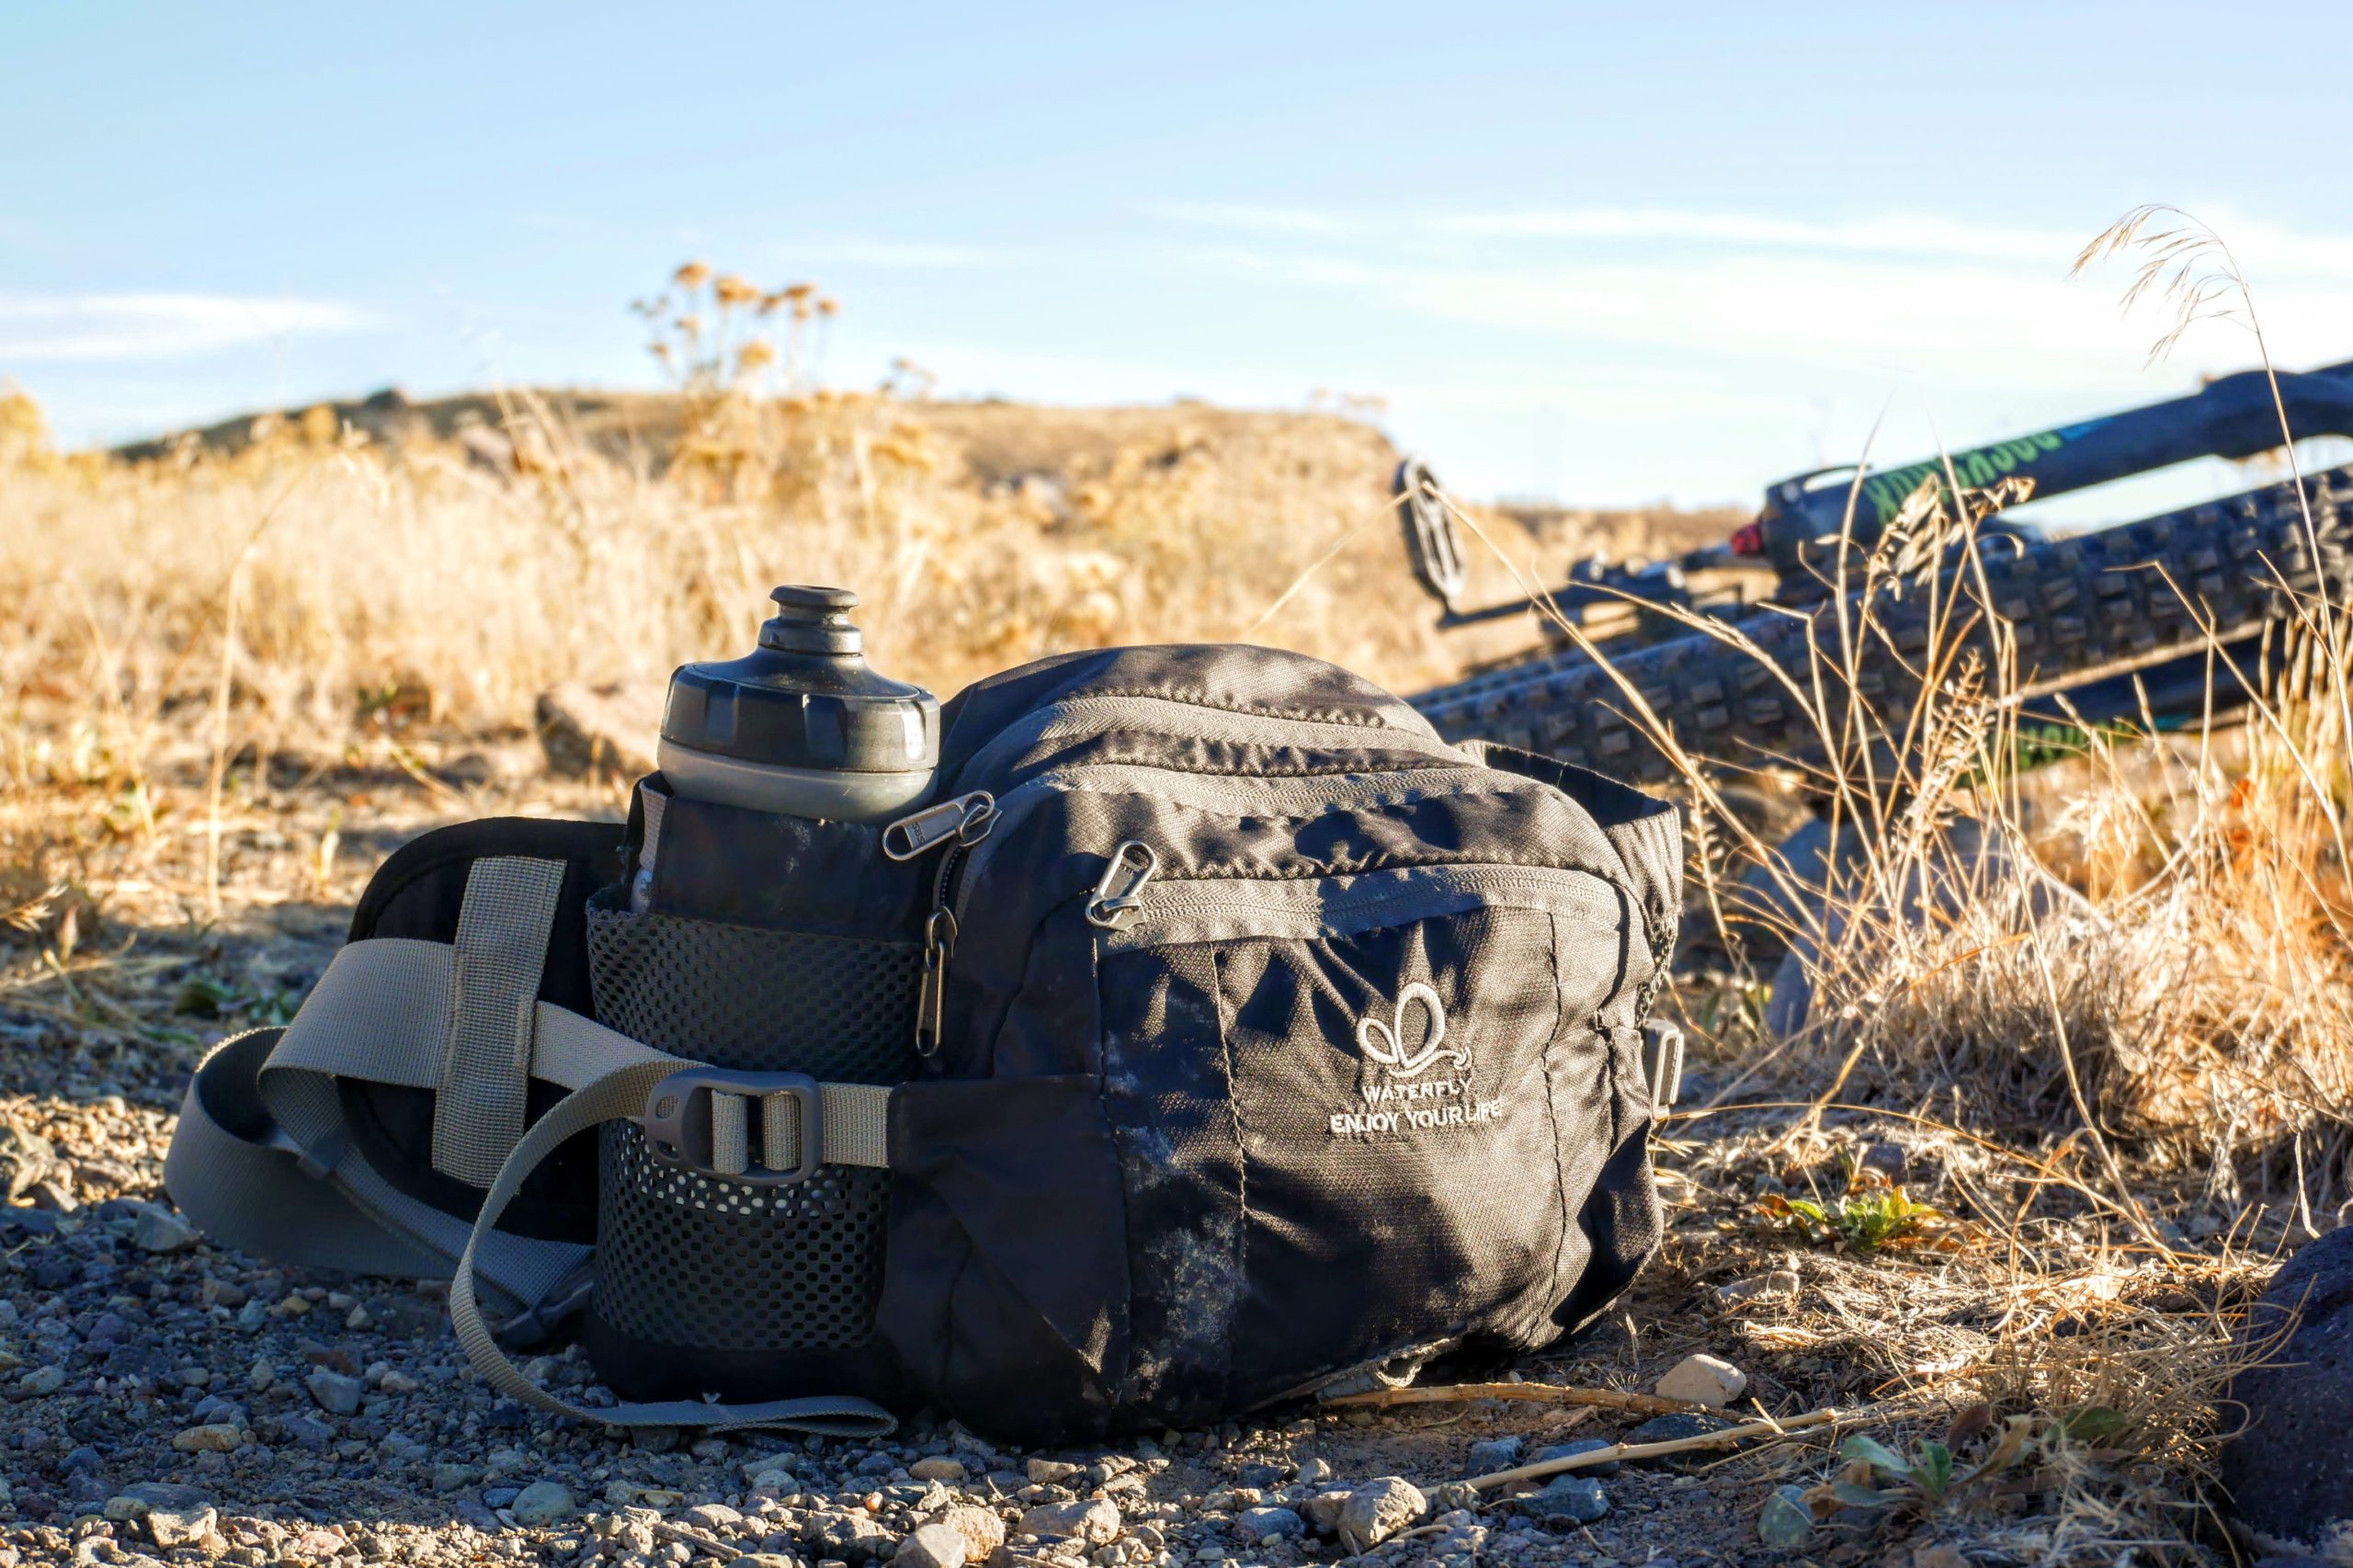 Waterfly Hip-Pack Review: Can a Budget Hip-Pack Work?